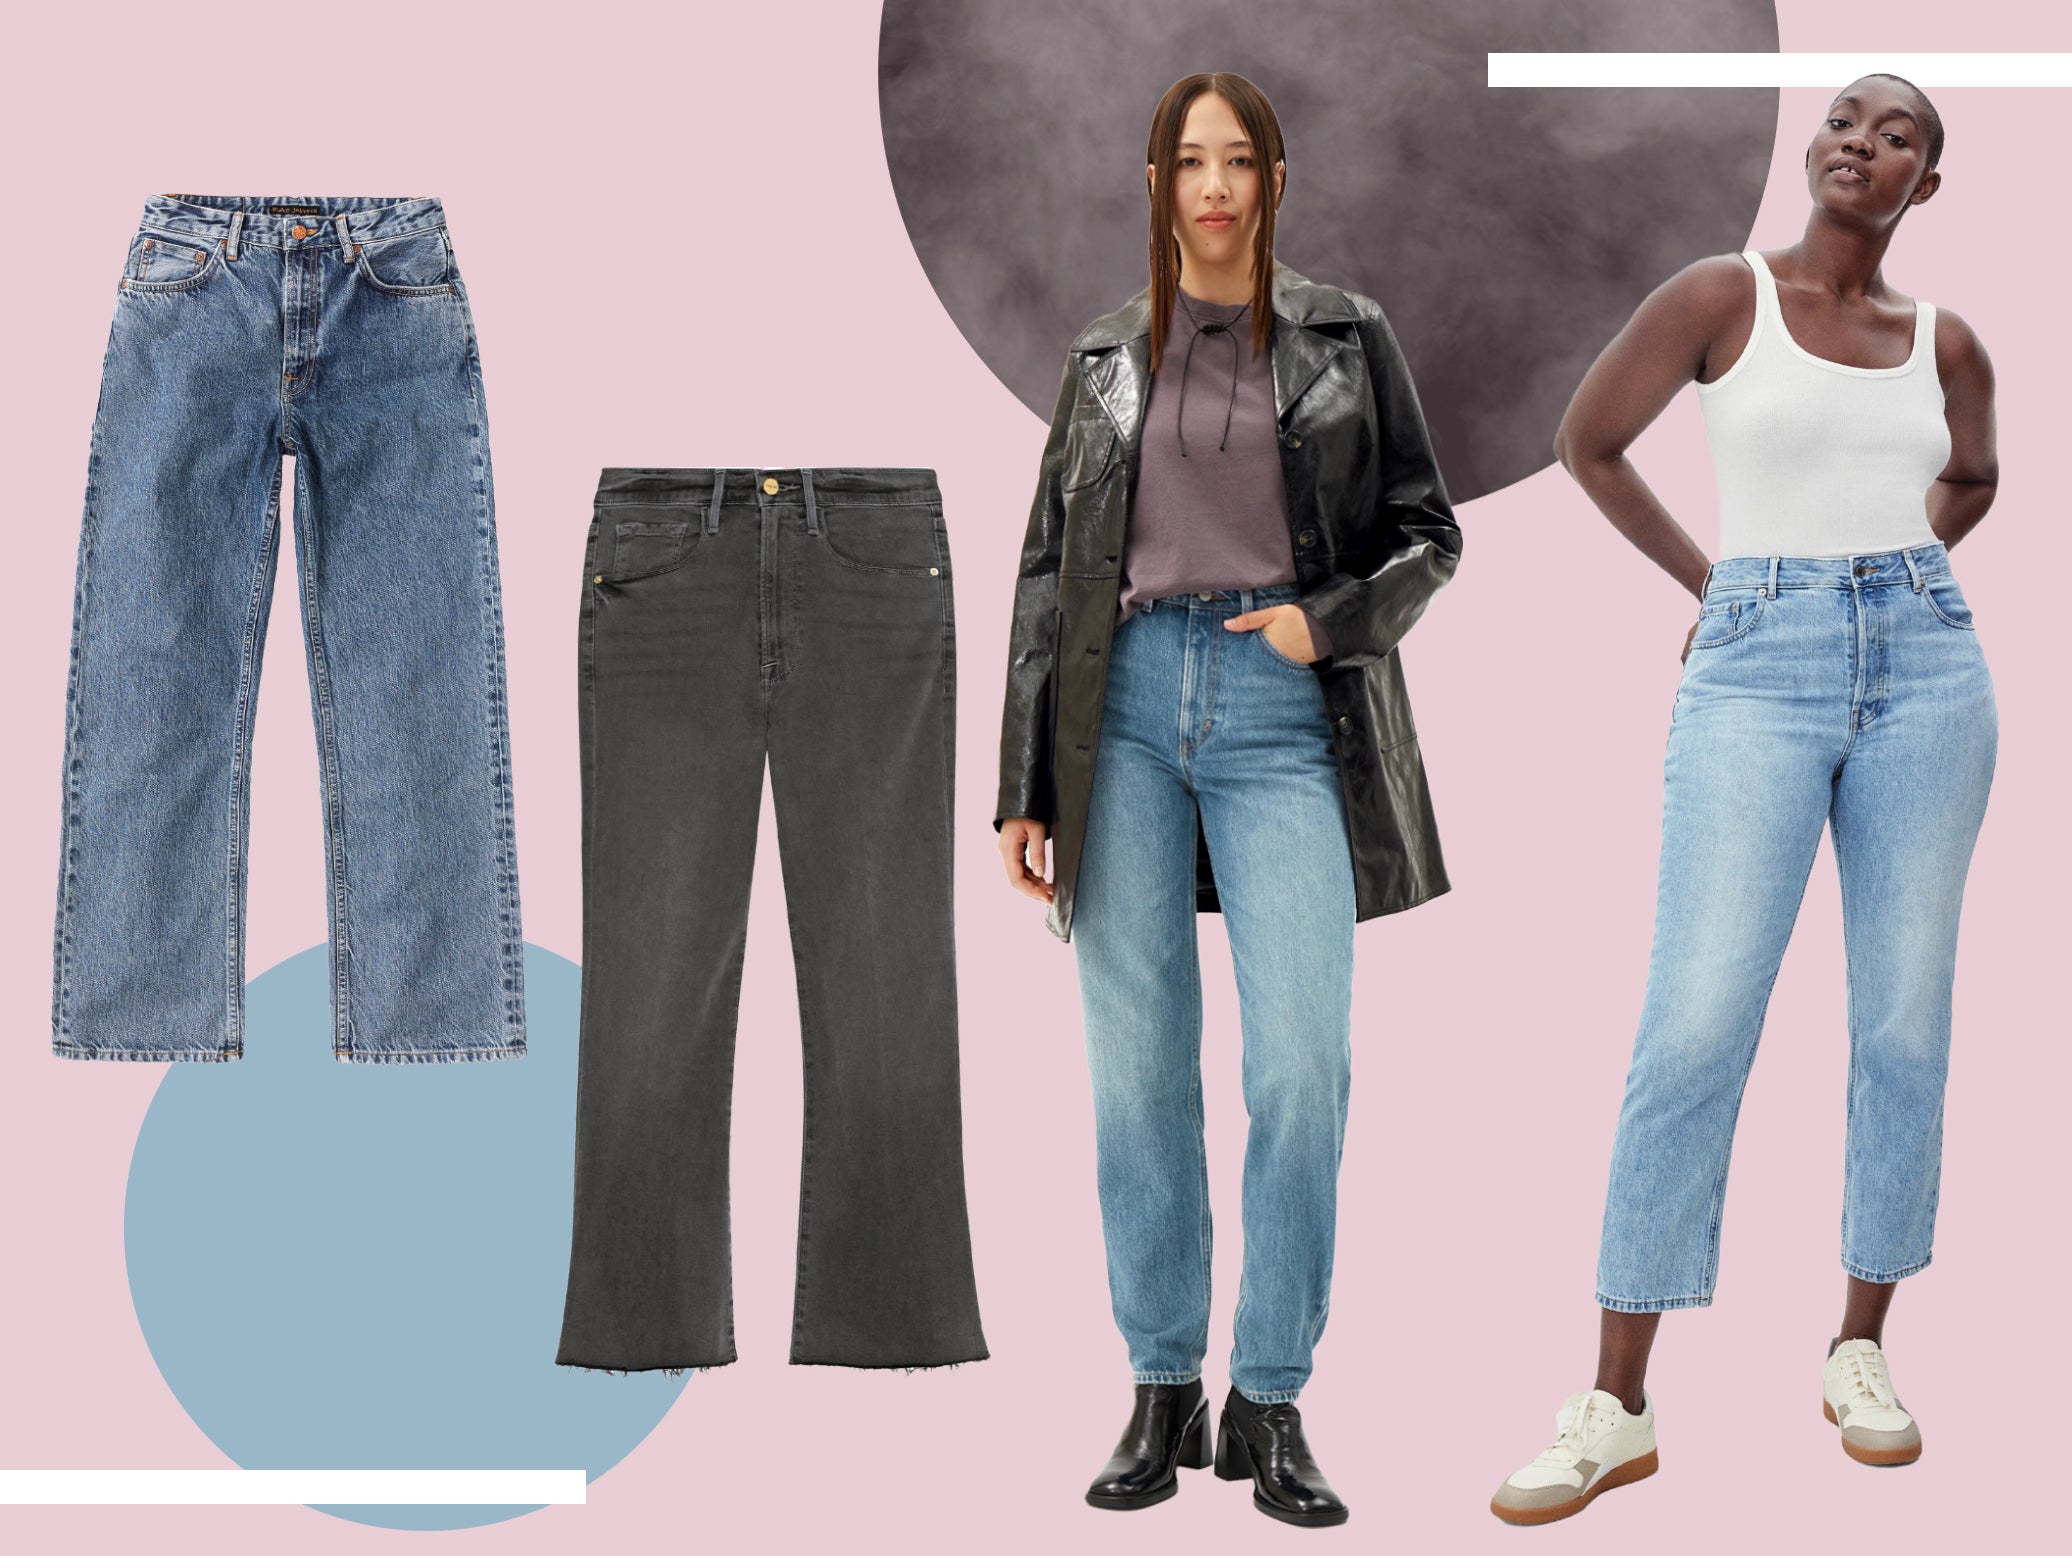 krone Undertrykkelse historie Best women's high waisted jeans 2022: Skinny, curvy, mom, flare and more |  The Independent